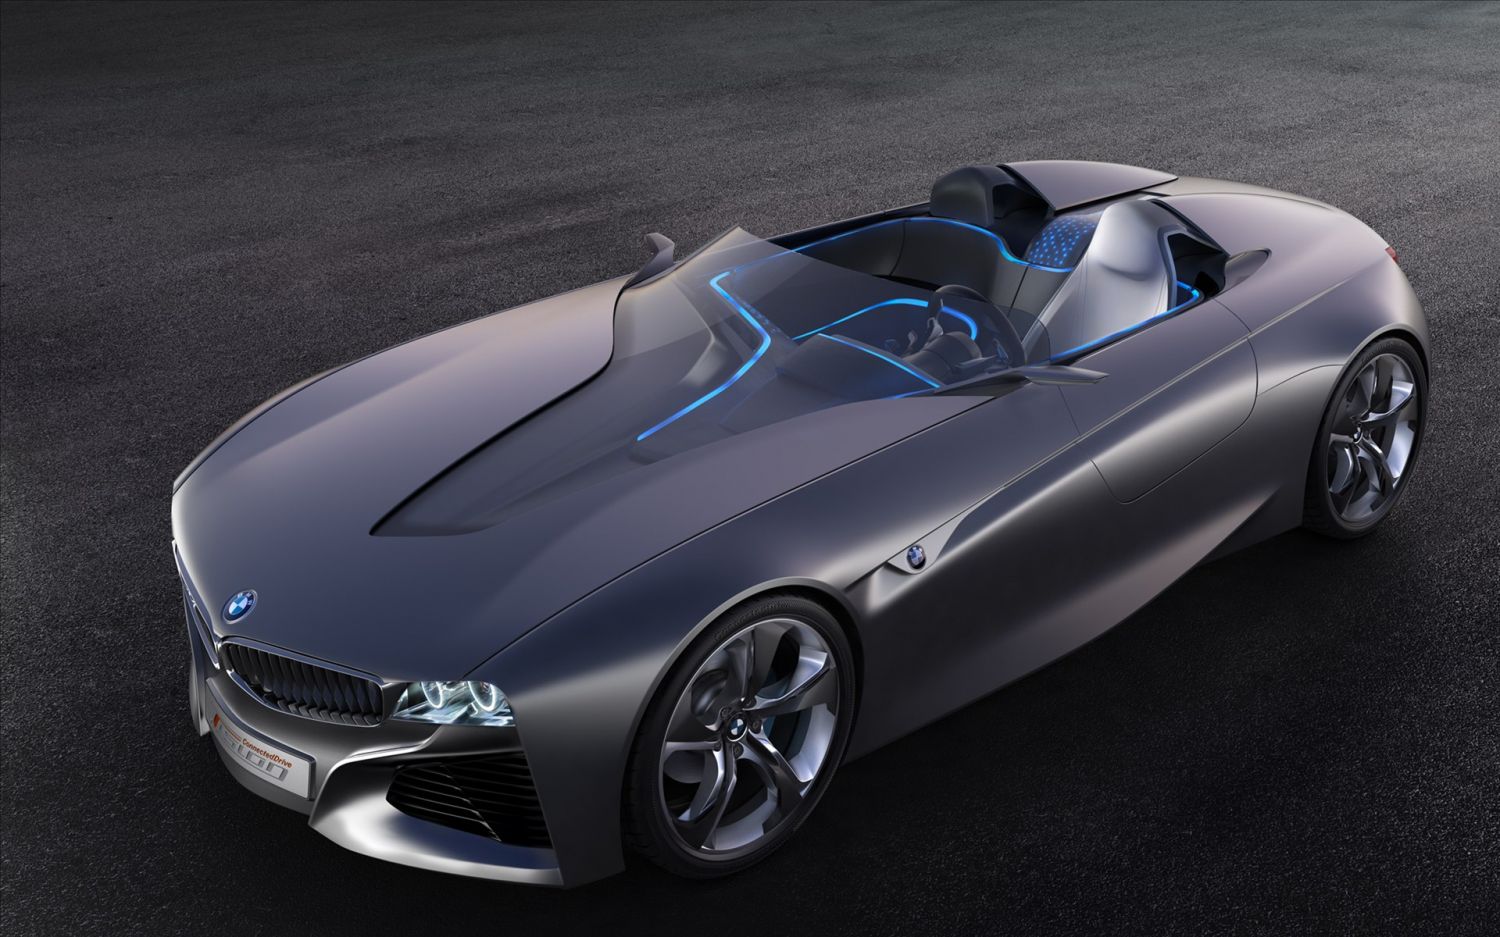 BMW-Vision-Connected-Drive-Concept-2011-widescreen-01.jpg